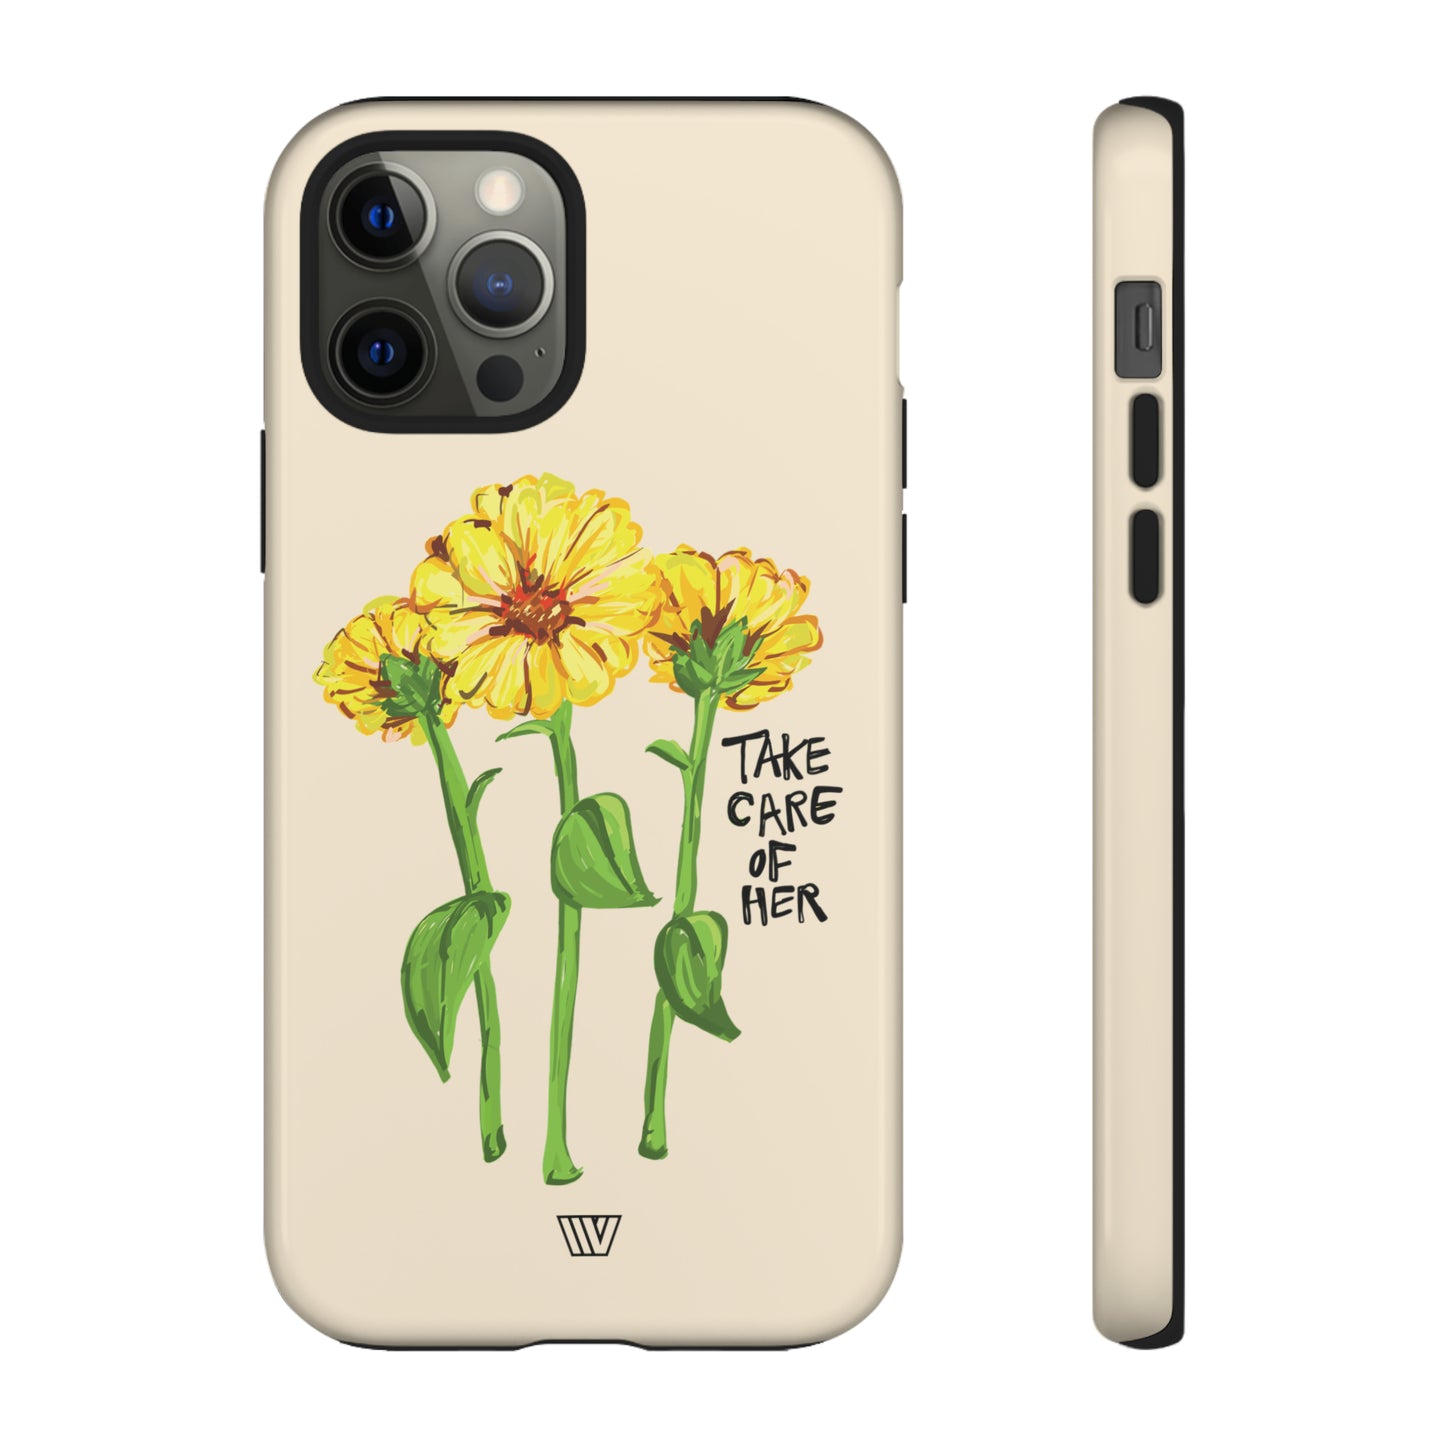 TAKE CARE OF HER | TROVVVE X EARTH FORMATIONS Tough Phone Case